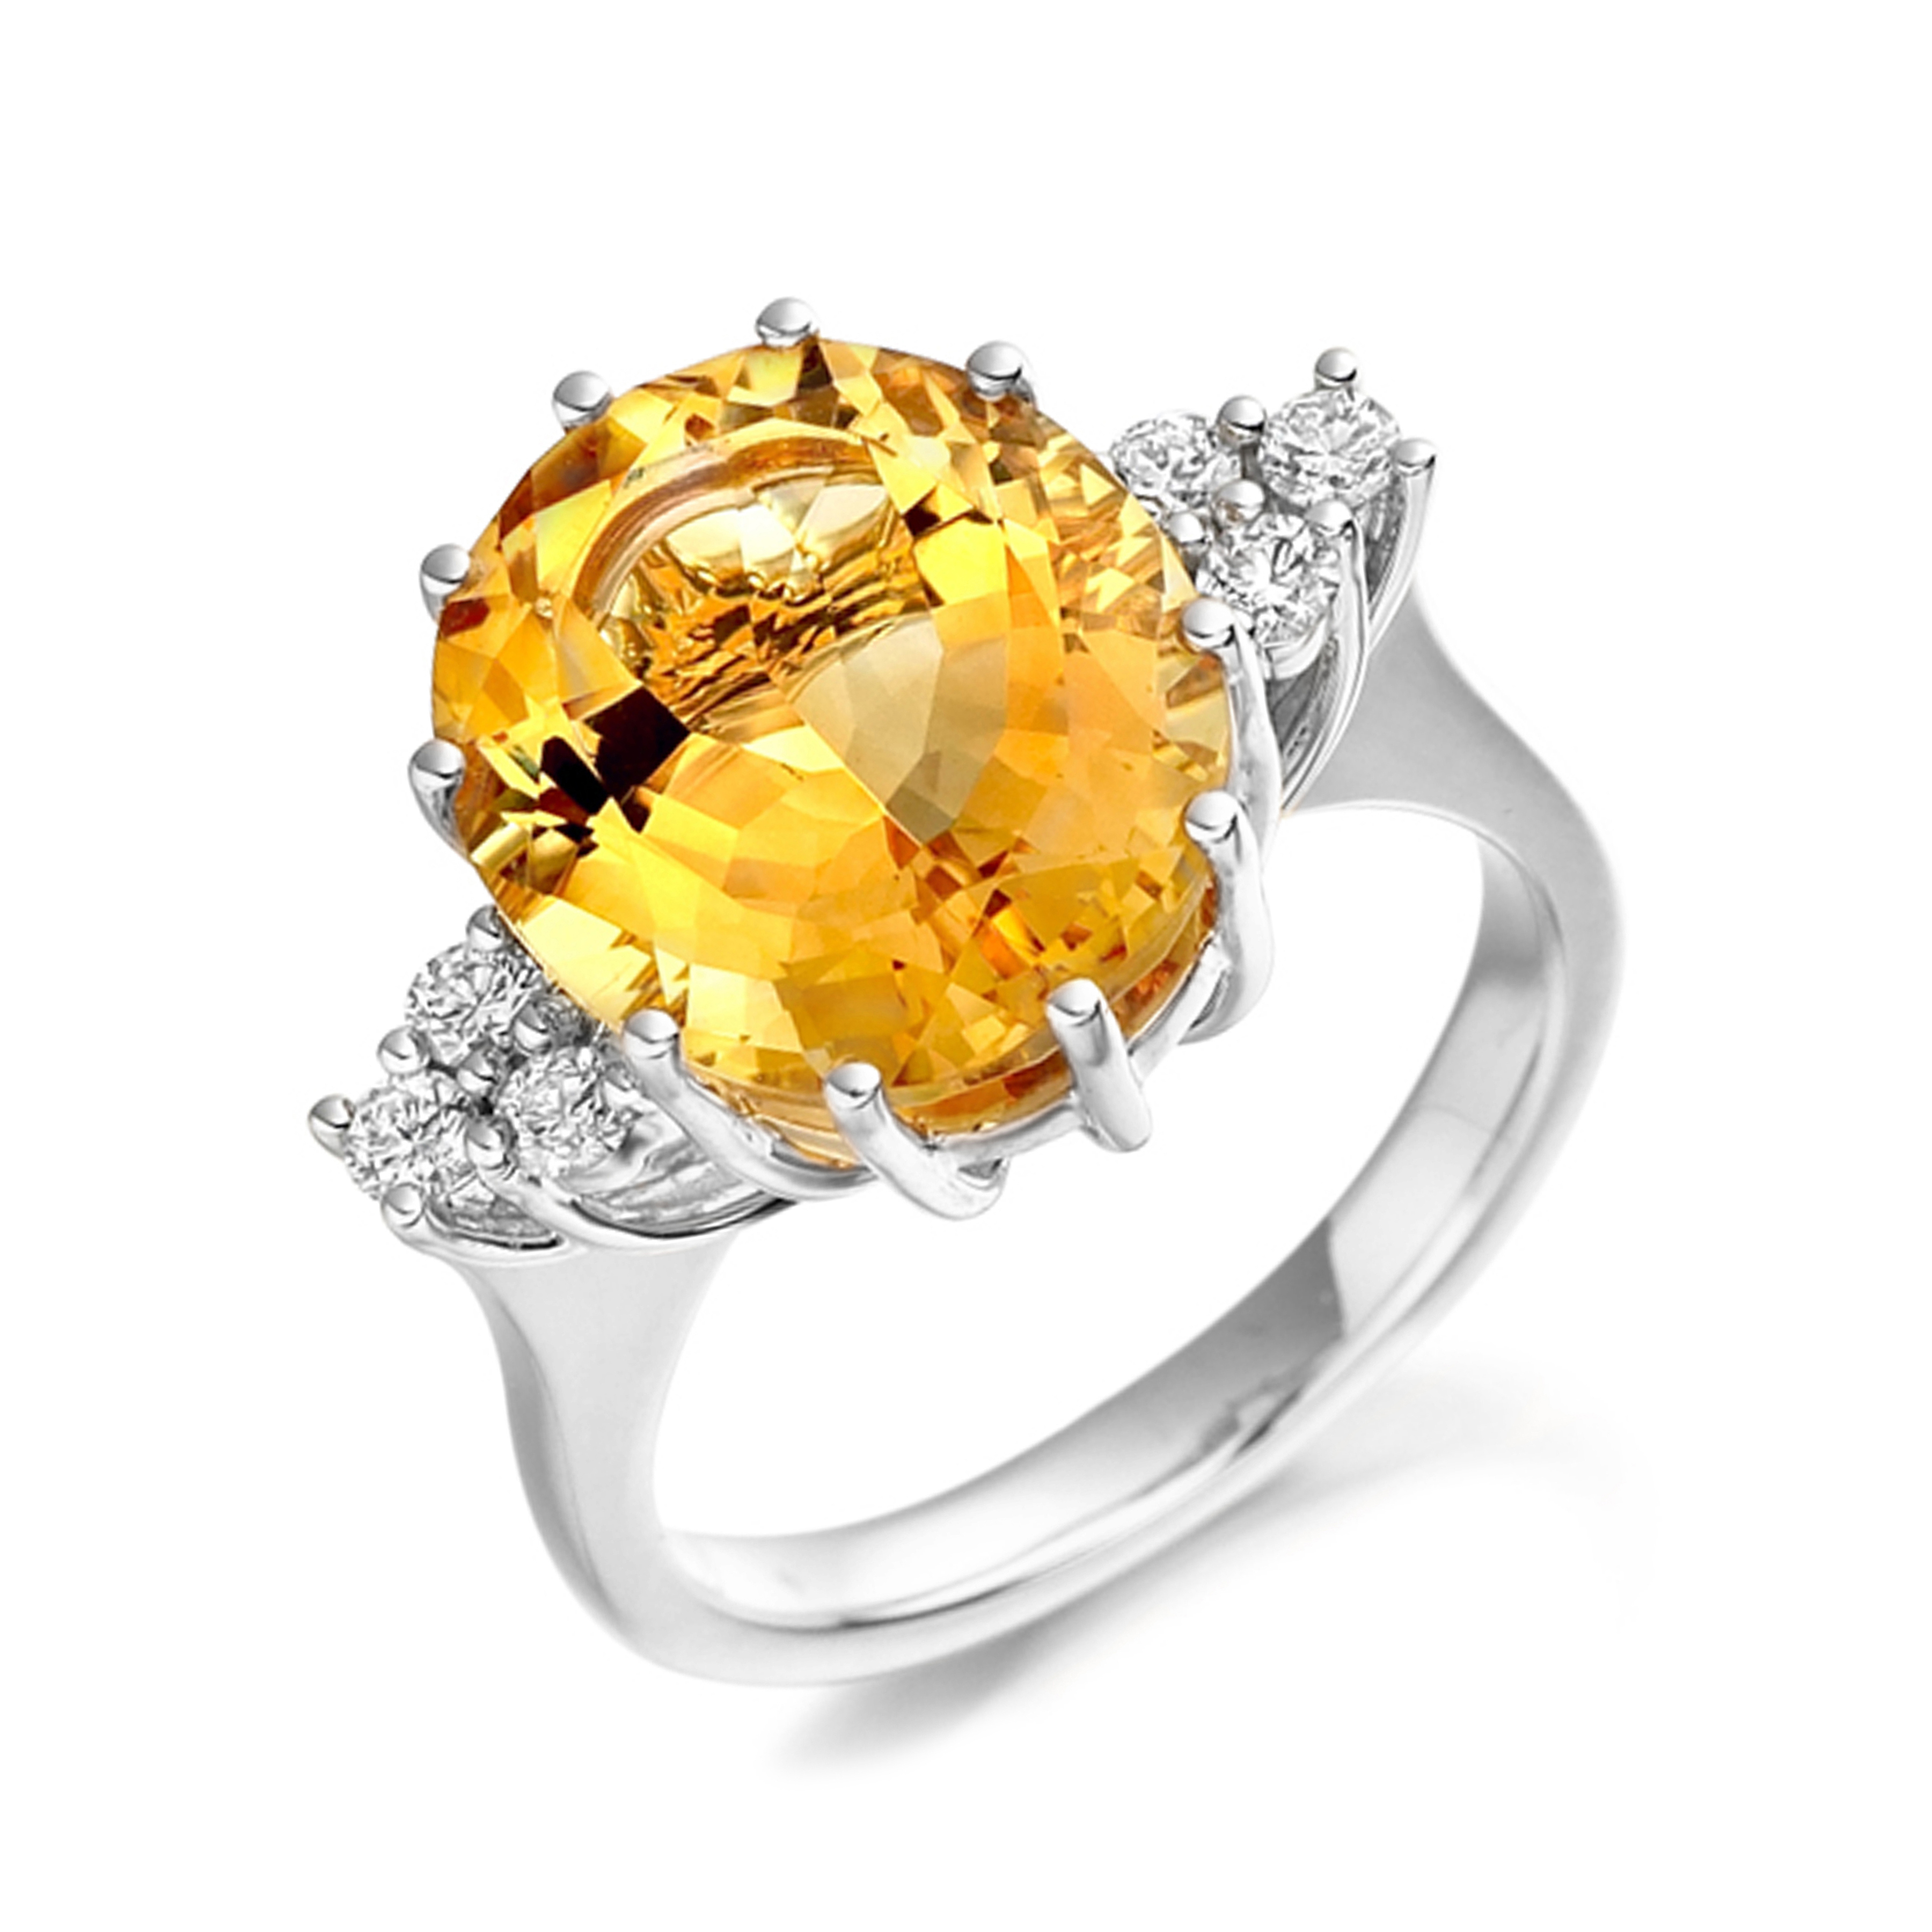 12X9mm Oval Citrine Side Stone Diamond And Gemstone Engagement Ring